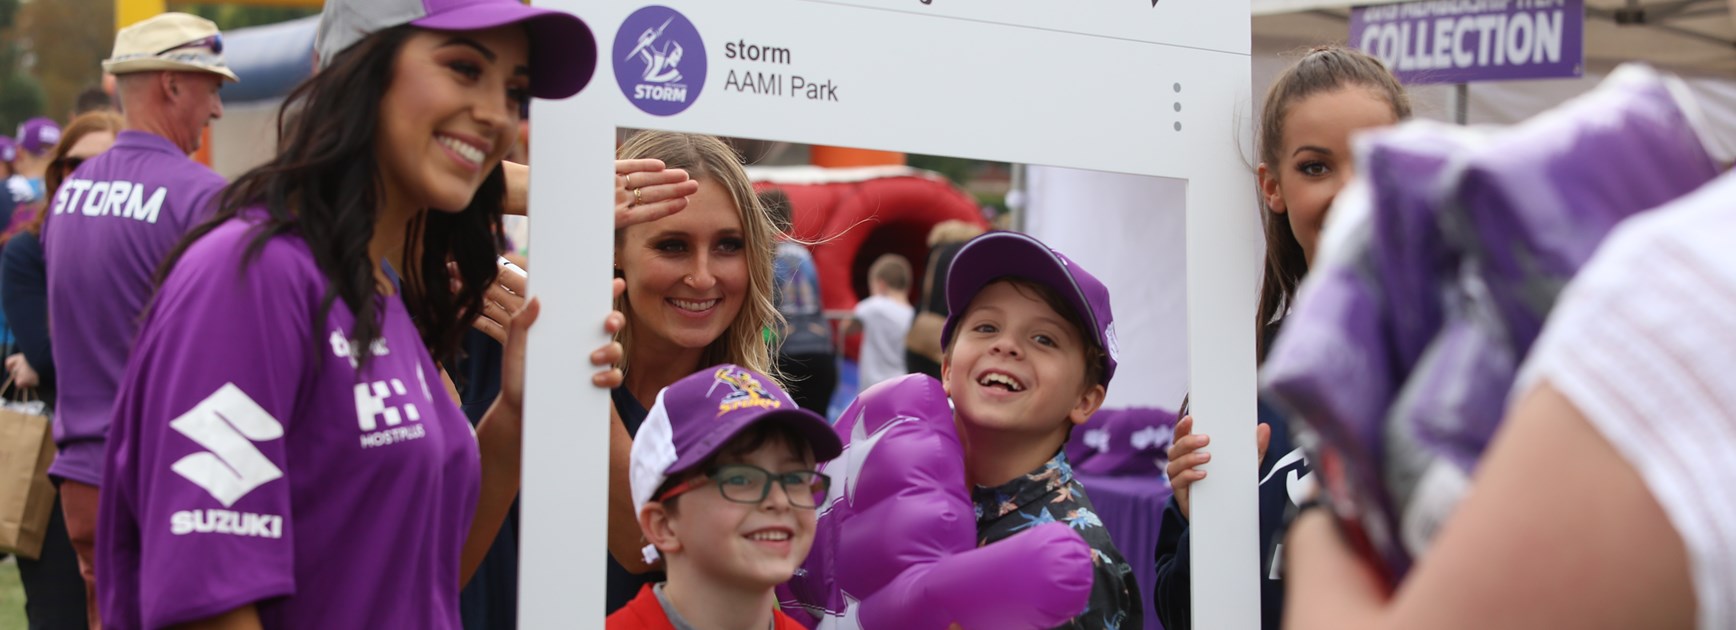 Support your Storm at Family Day!